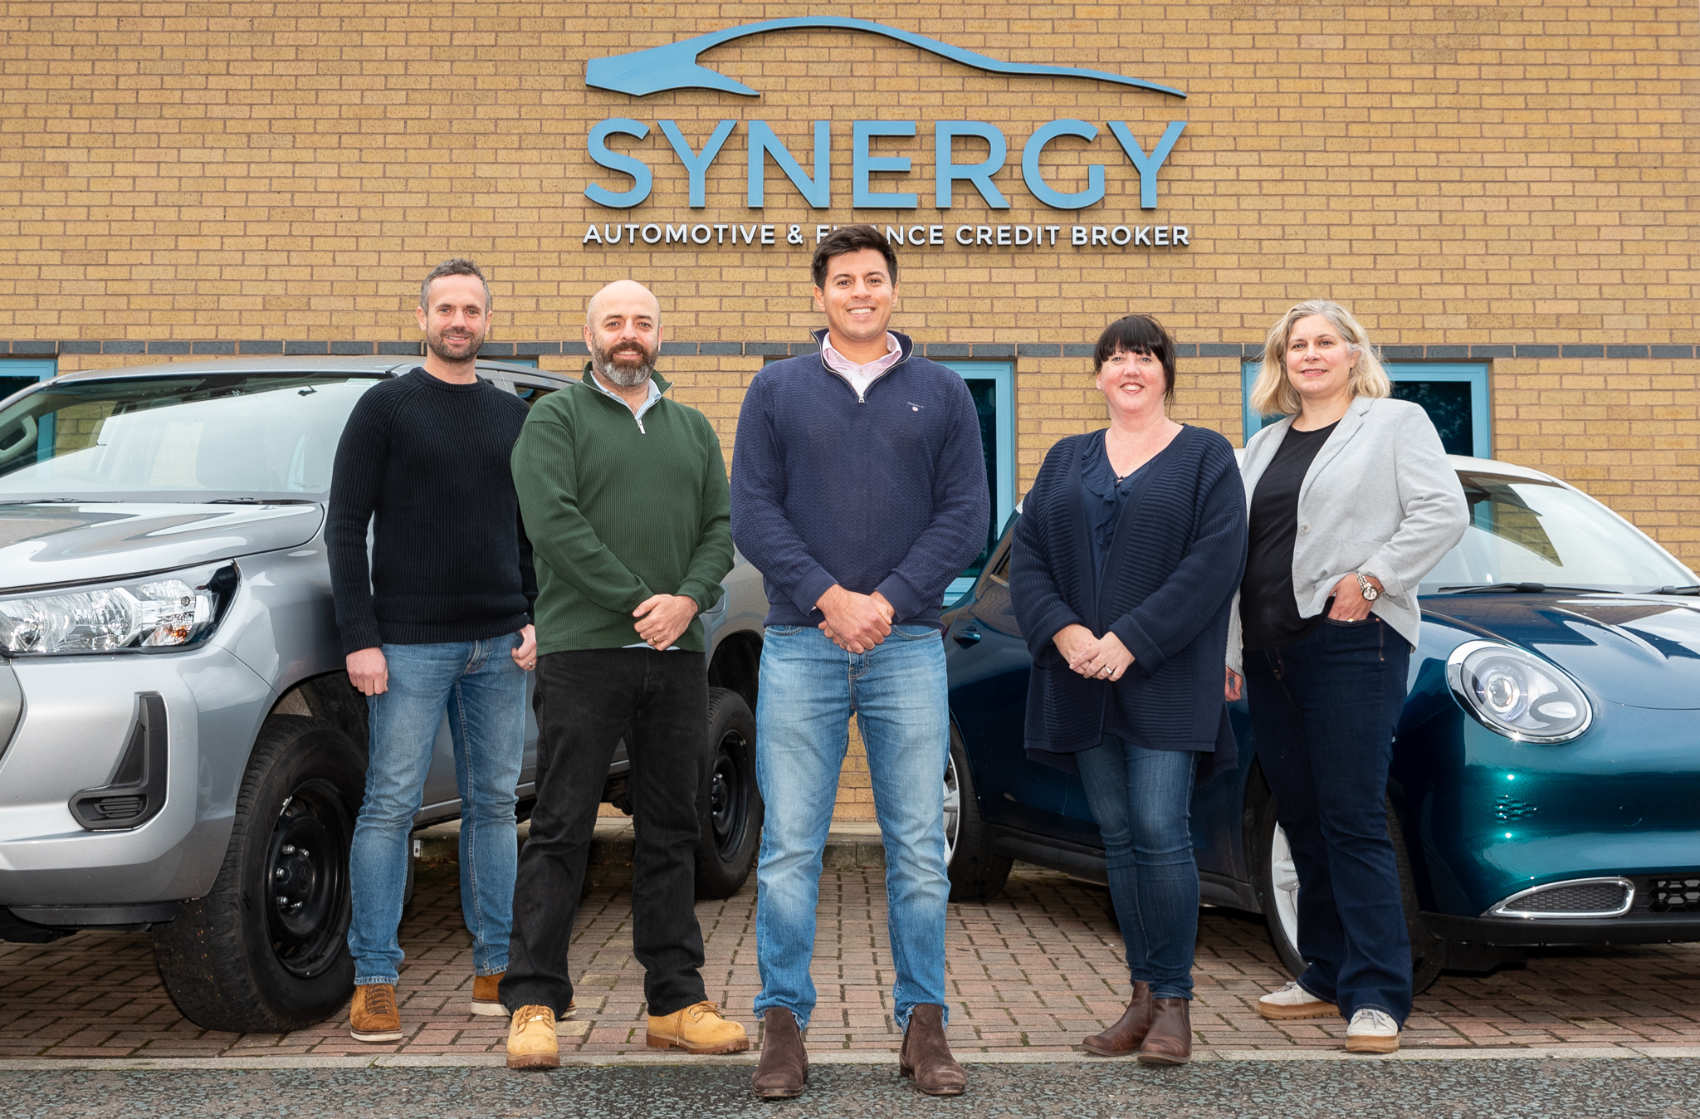 Will Voisey – General Sales Manager, Jean-Paul Levahn – IT & Technical Director , Phil Reynolds – Managing Director, Newable Finance, Gemma Manning – Client Services Director, Nicola Ech-Channa – Marketing & Communications Director